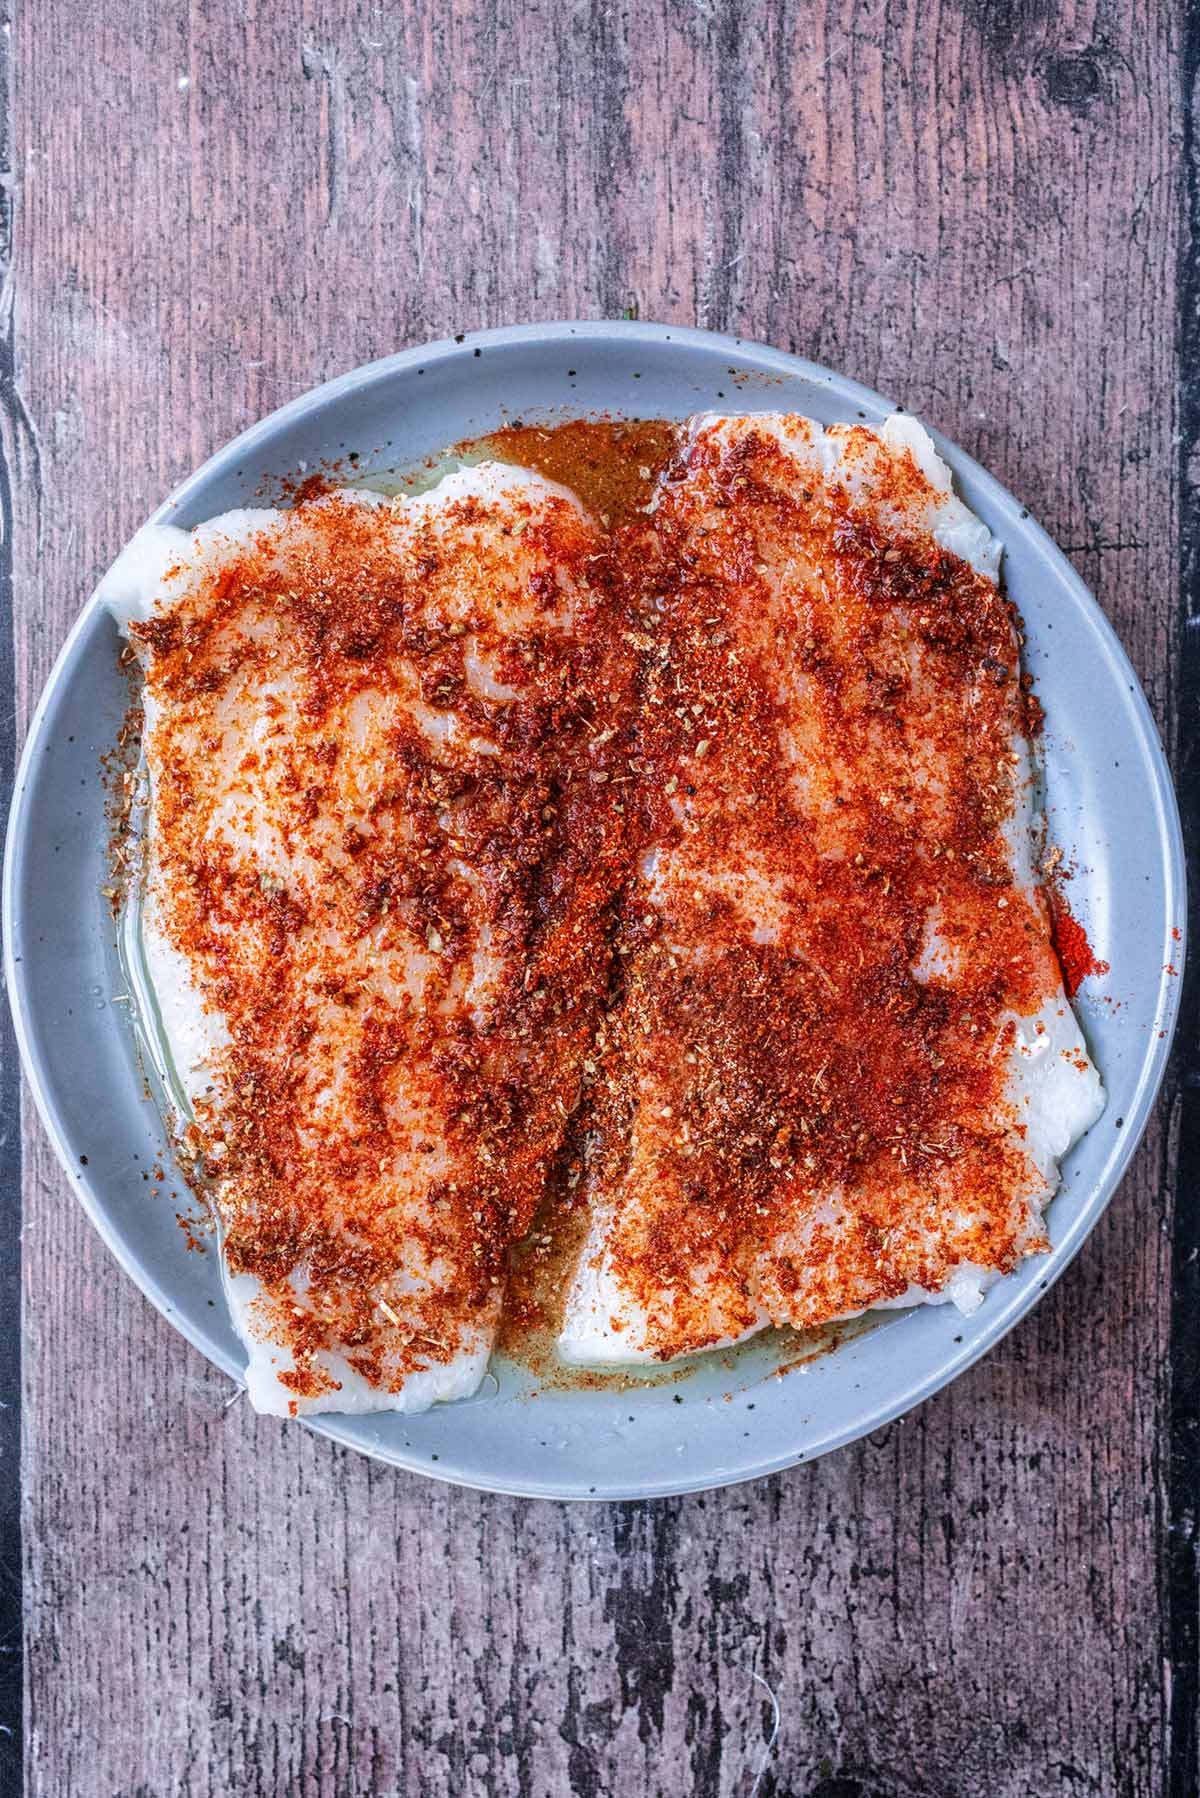 Two cod fillets coated in a spice blend.